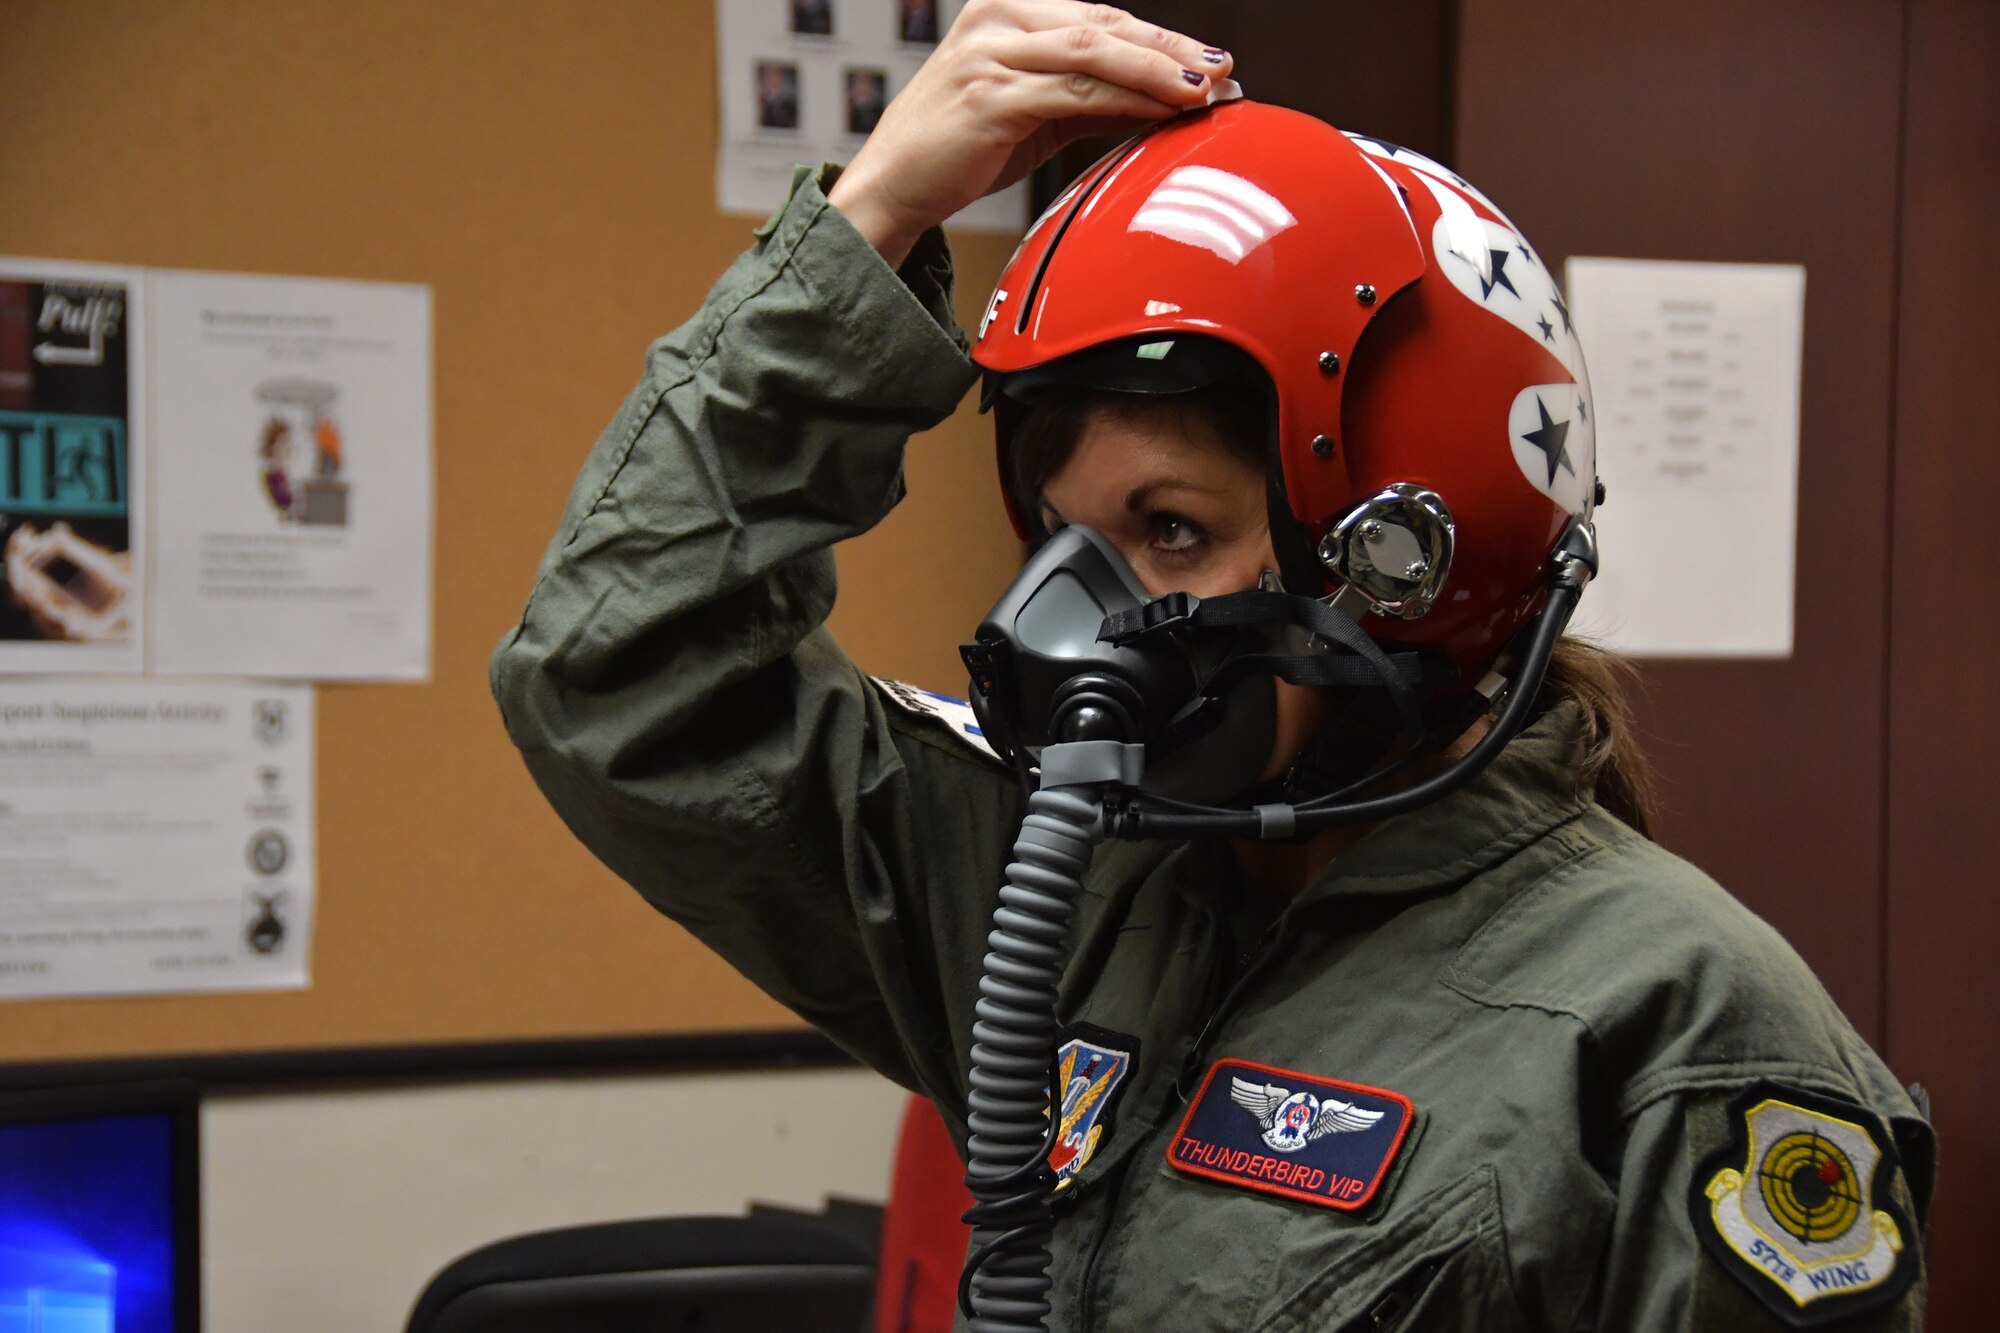 Tracey Pendley, an Atlanta Public Schools fourth grade teacher, adjusts the visor on her helmet at Dobbins Air Reserve Base, Ga. on Oct. 11, 2019. In addition to being named Georgia’s Teacher of the Year, she was also nominated as a Hometown Hero, a program which allows exceptional community members to be nominated for a familiarization flight in a Thunderbirds jet, an F-16 Fighting Falcon.  (U.S. Air Force photo/Airman Kendra A. Ransum)